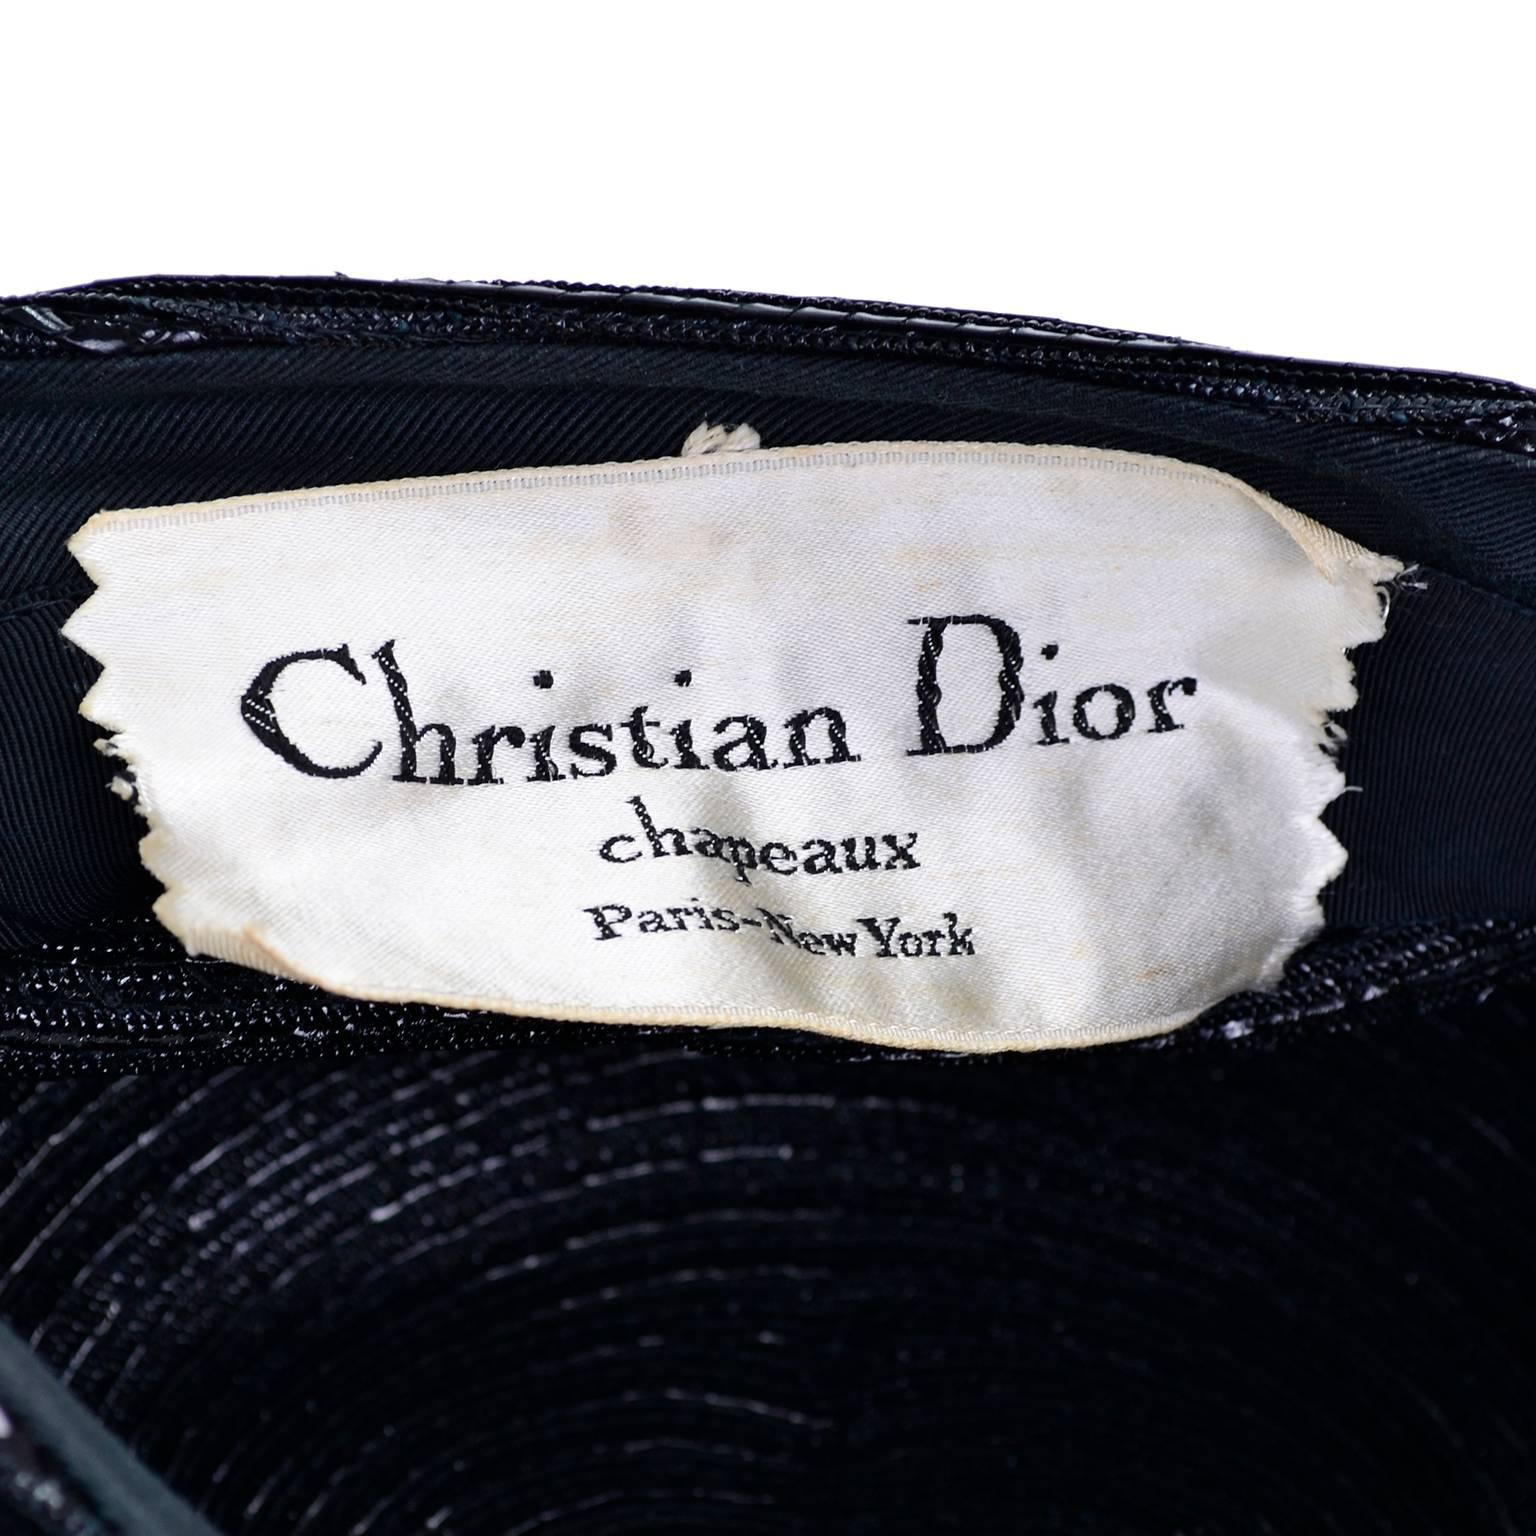 Women's 1960s Vintage Christian Dior chapeaux Turban Style Beret Hat Black Coated Straw